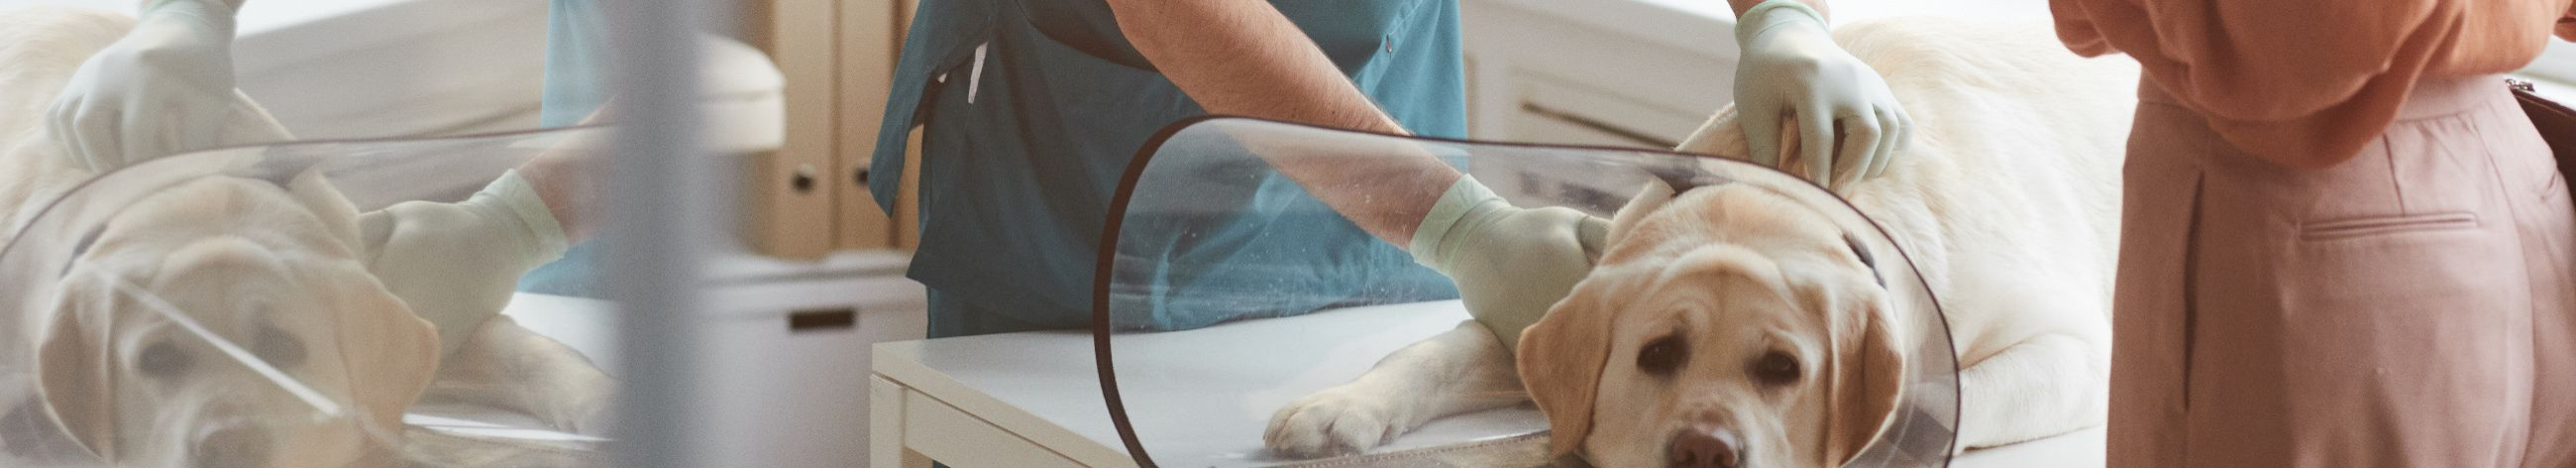 We provide a full range of veterinary services including disease prevention, surgical care, pet identification, and home visits.